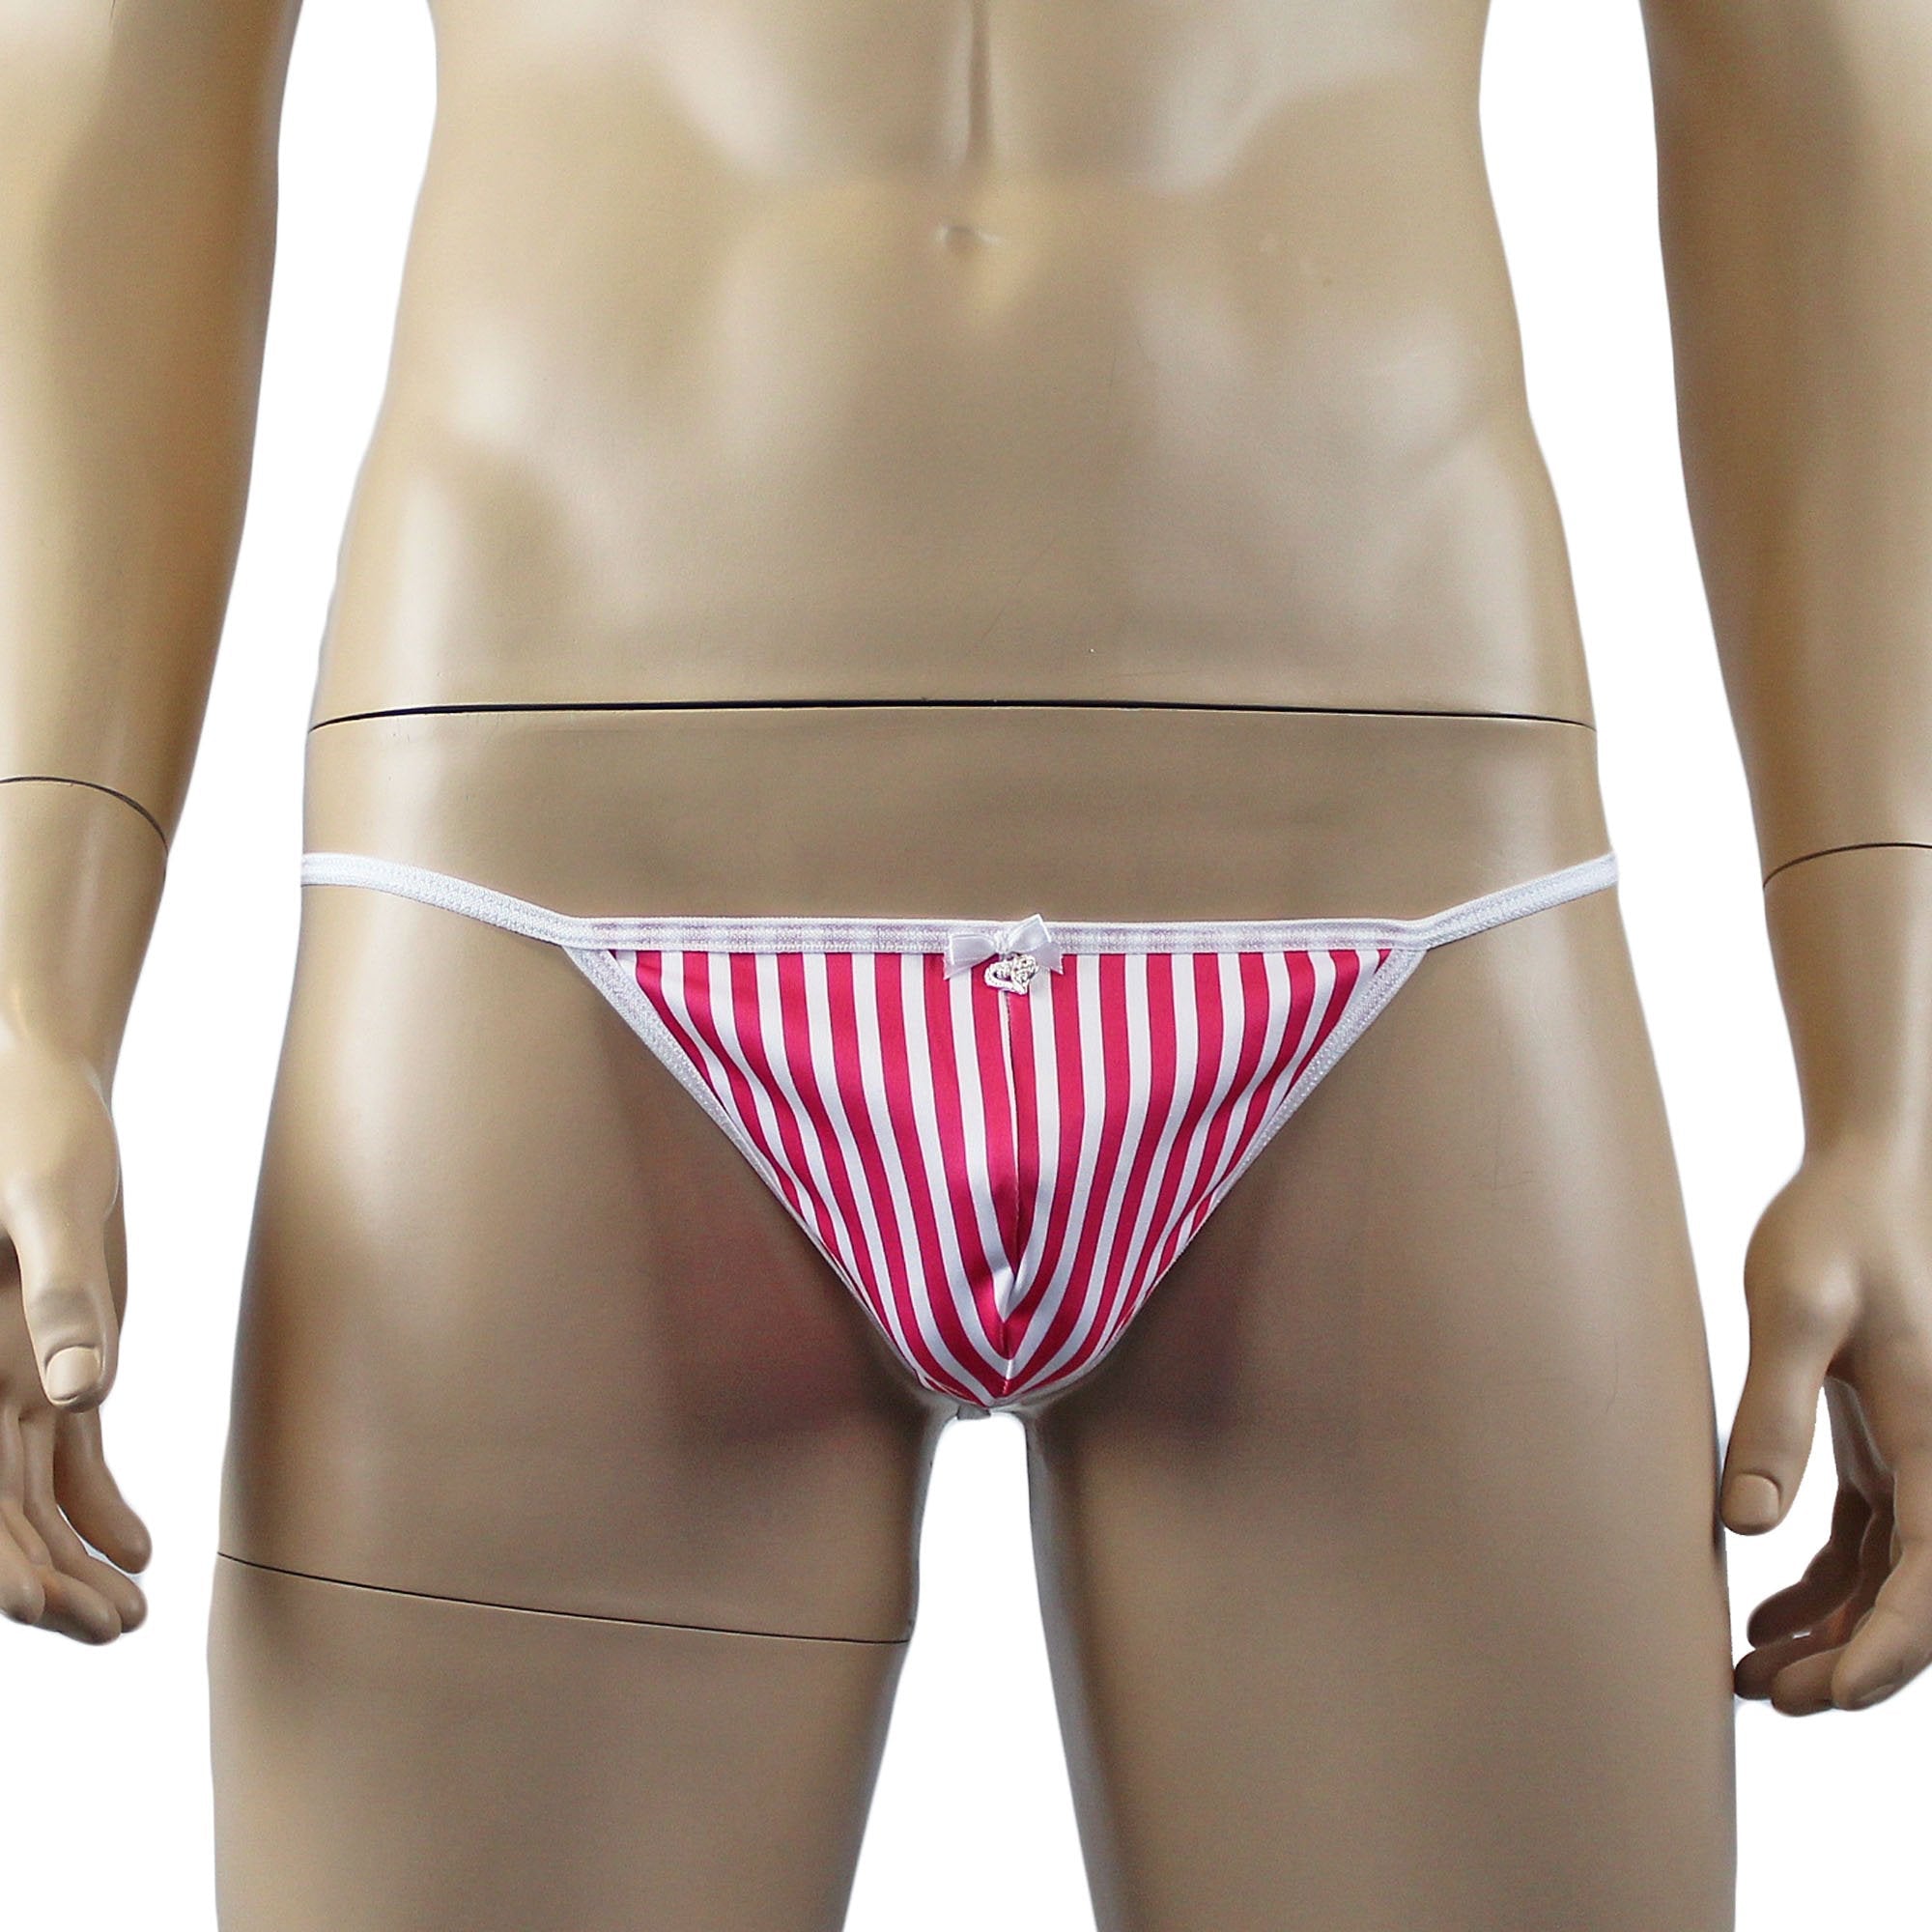 SALE - Candy Stripes Christmas Mens G string Pouch Xmas Underwear